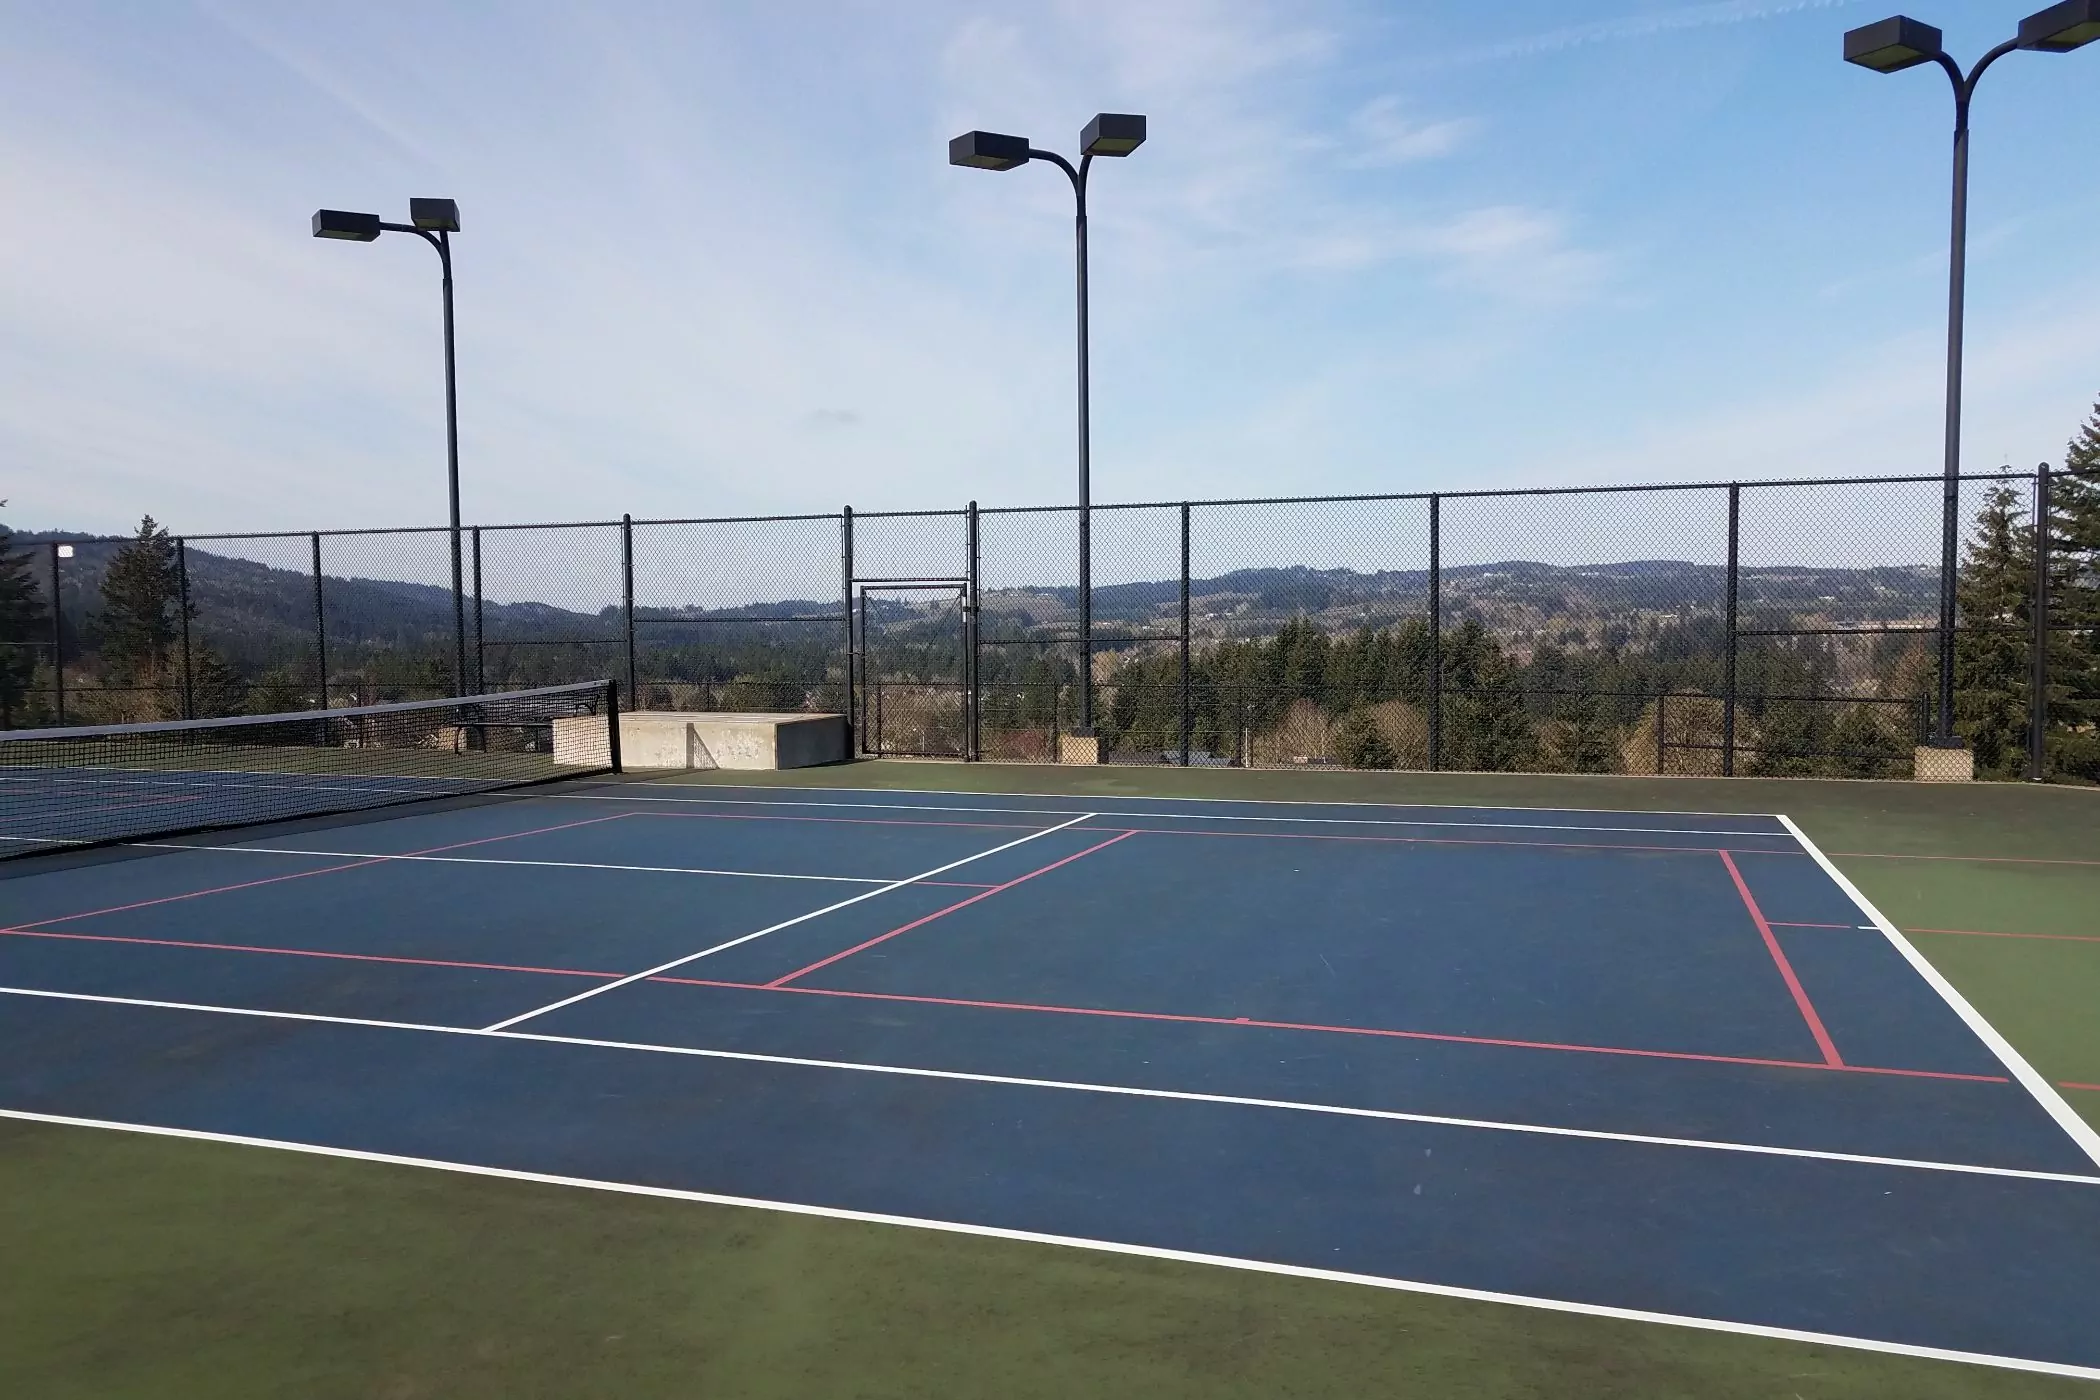 How Big Is A Full Size Pickleball Court?